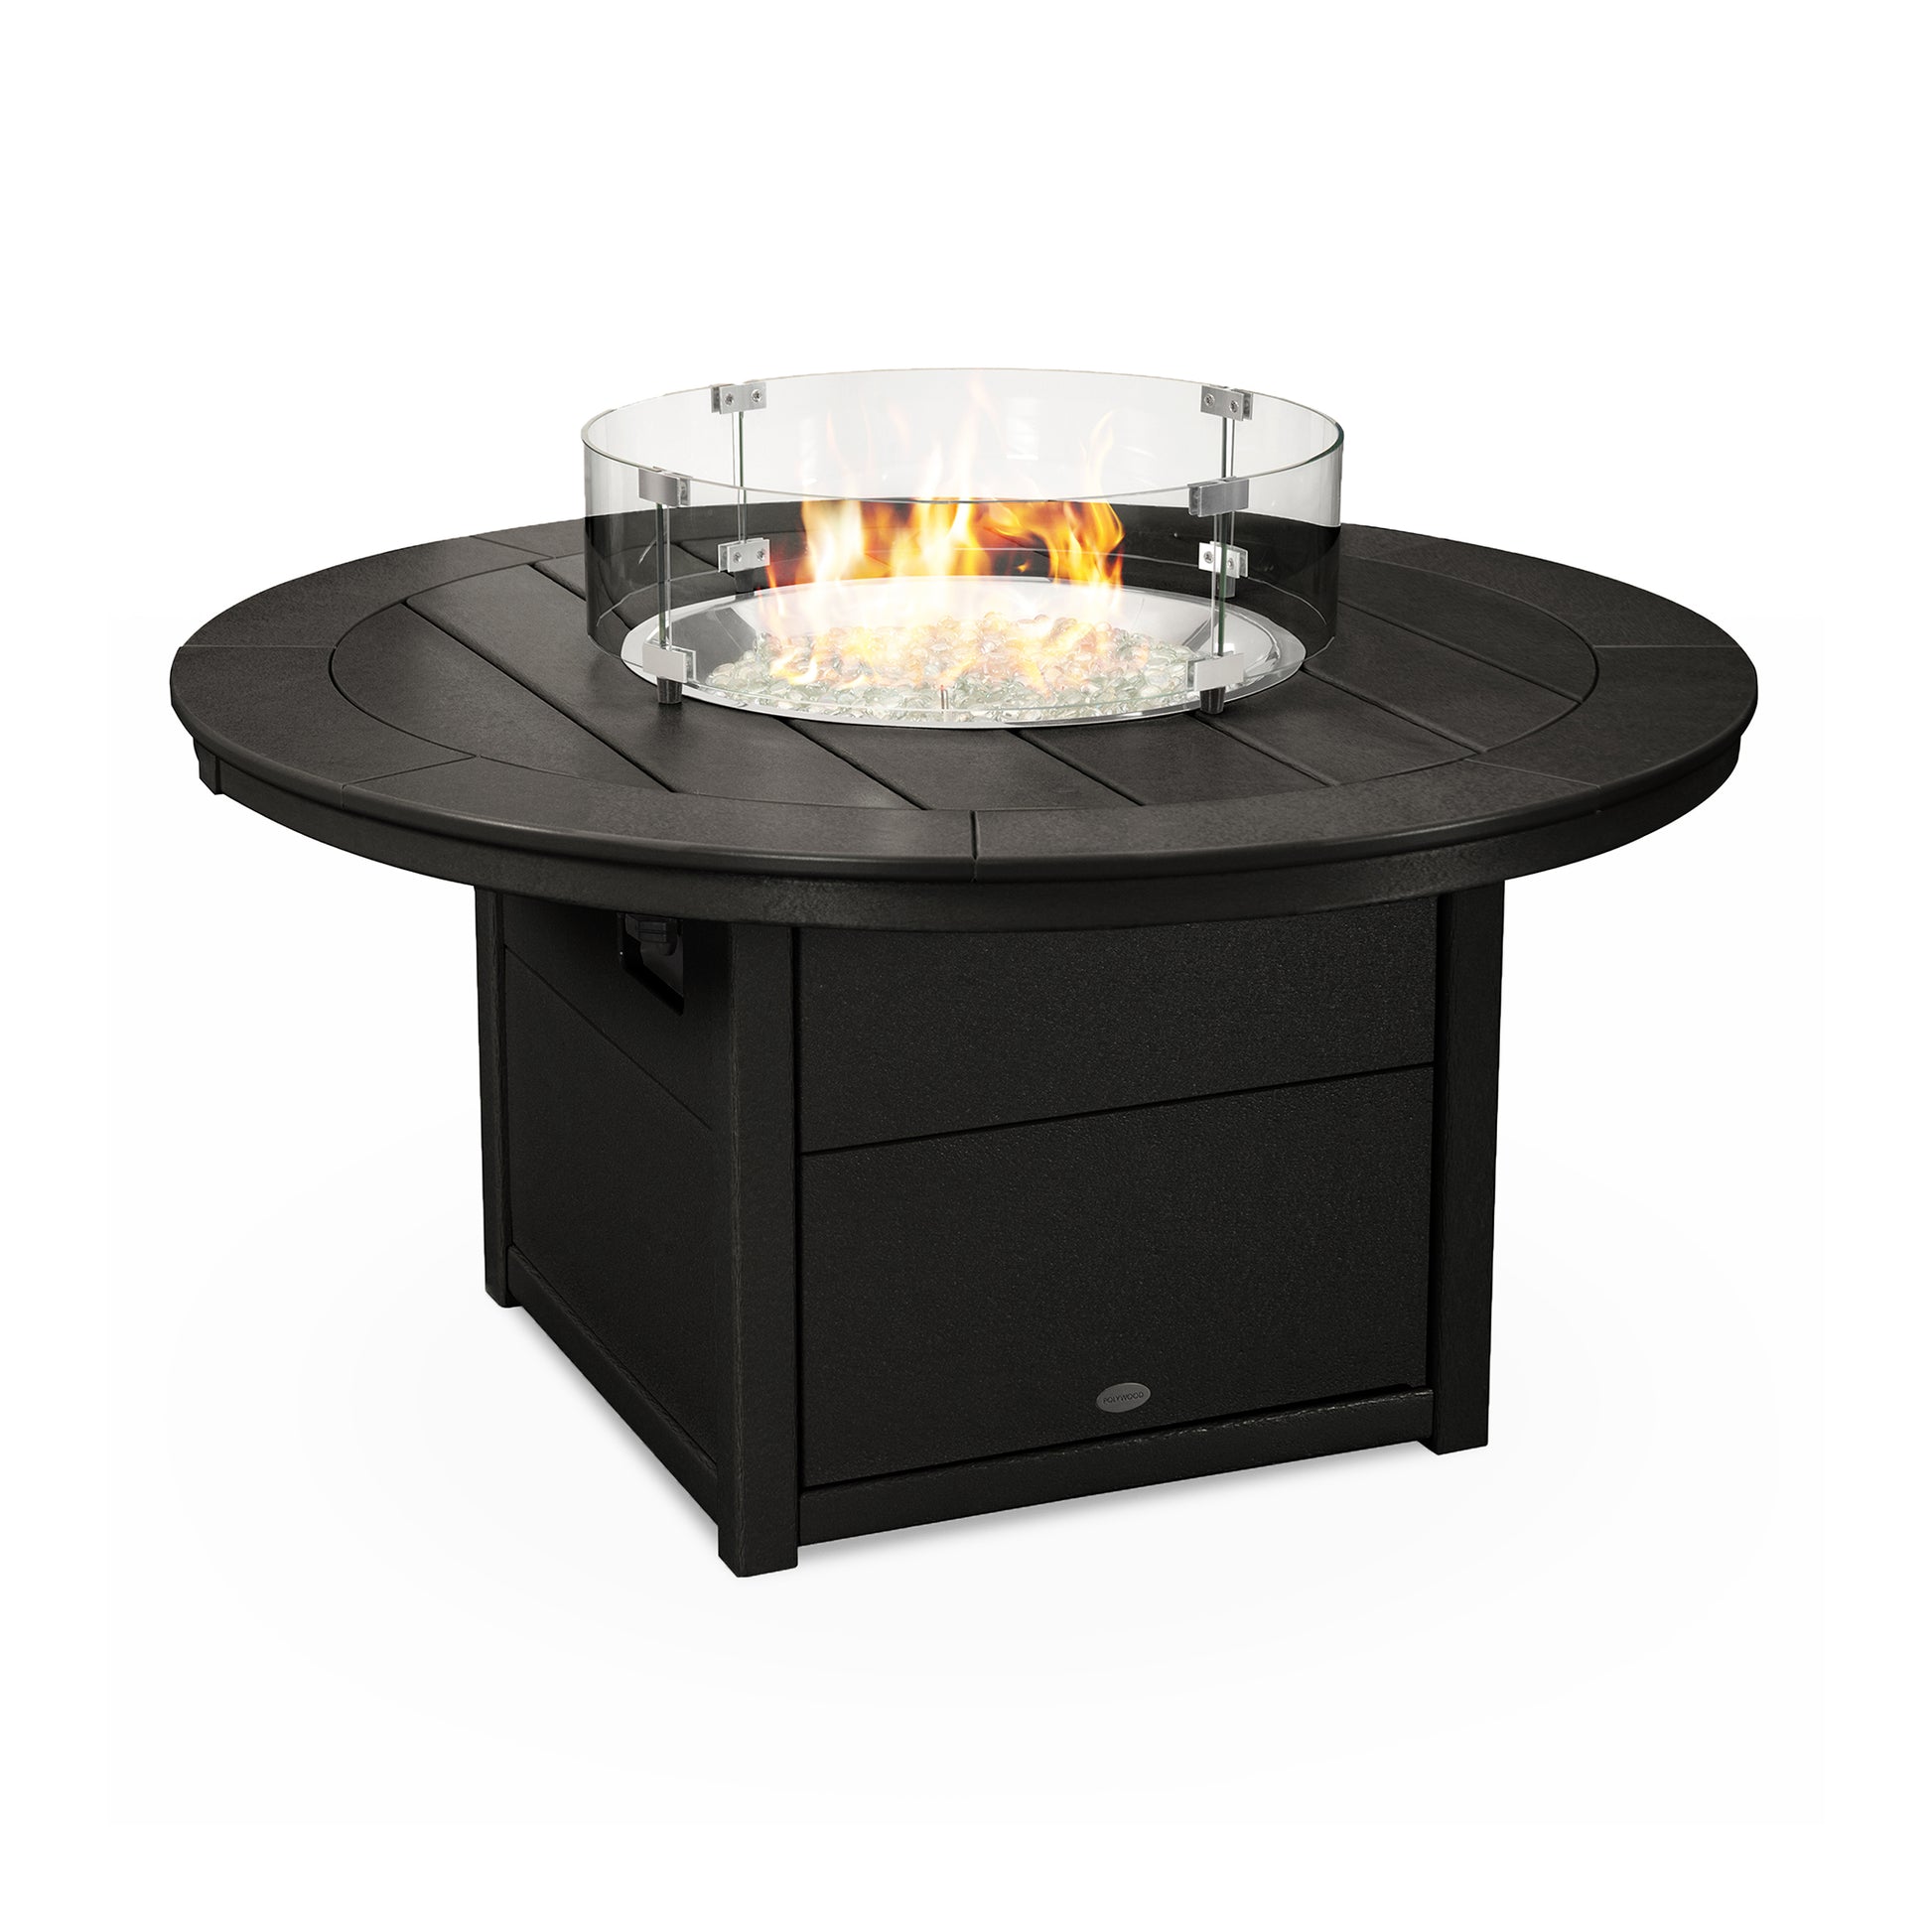 A round, black POLYWOOD outdoor fire pit table with a clear glass wind guard and visible flames above a bed of fire glass crystals, set against a plain white background. This model features a hidden compartment designed to